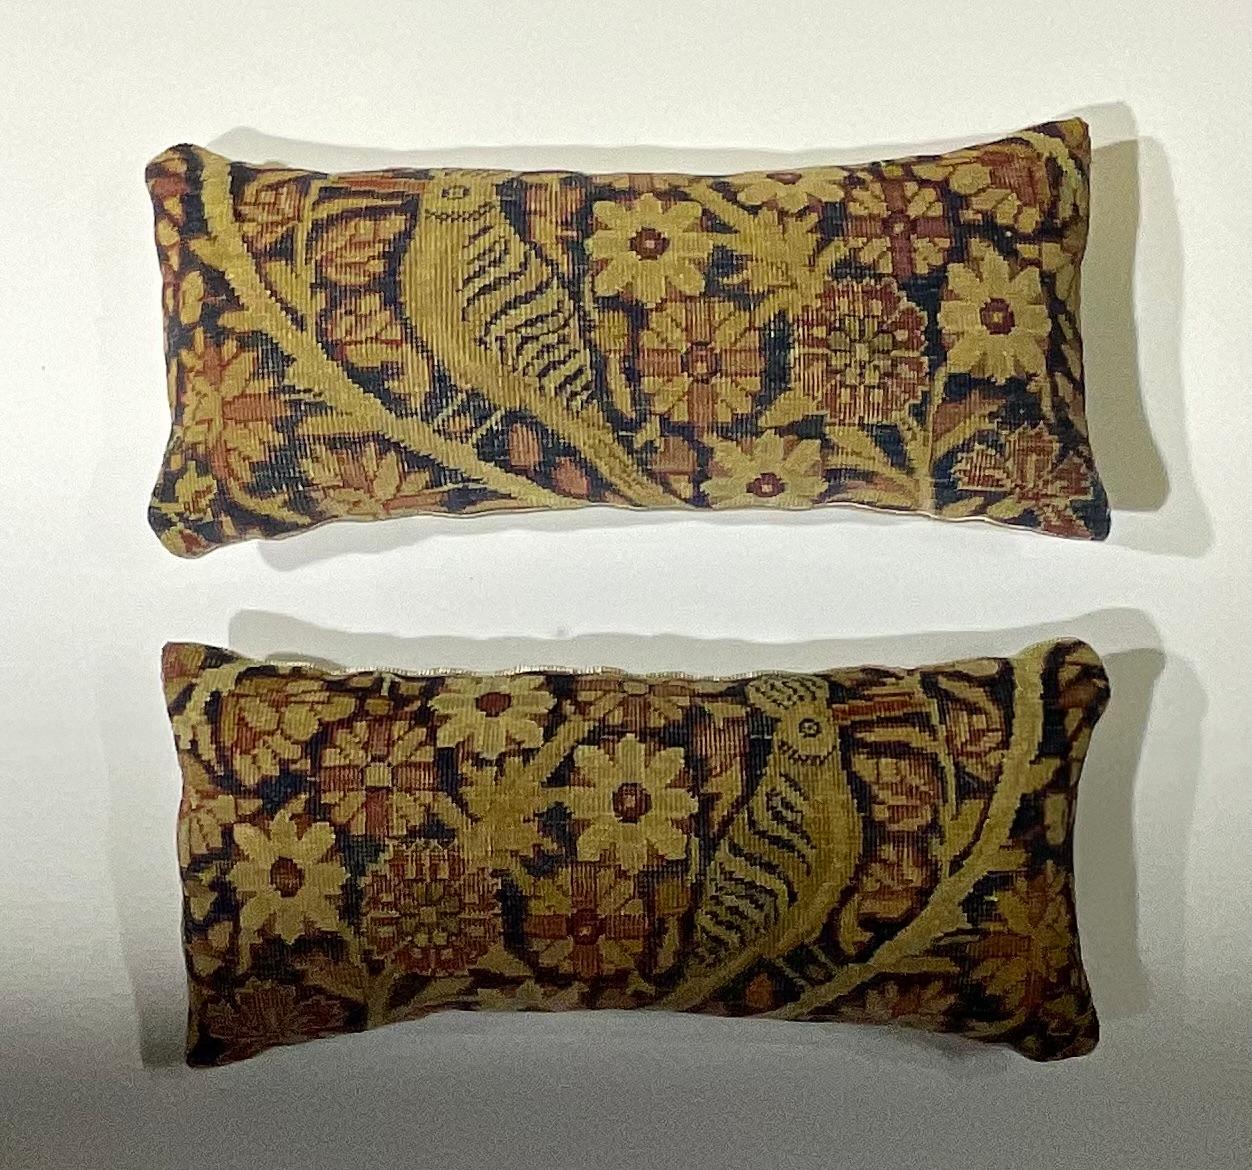 Beautiful pillows made of hand woven 19th century antique Lavar Carmon rug fragment, of two hoopoes birds surrounded with vines and flowers. Fine fresh insert, quality linen backing.
Fragment is hand wash before become pillow.
Great addition to